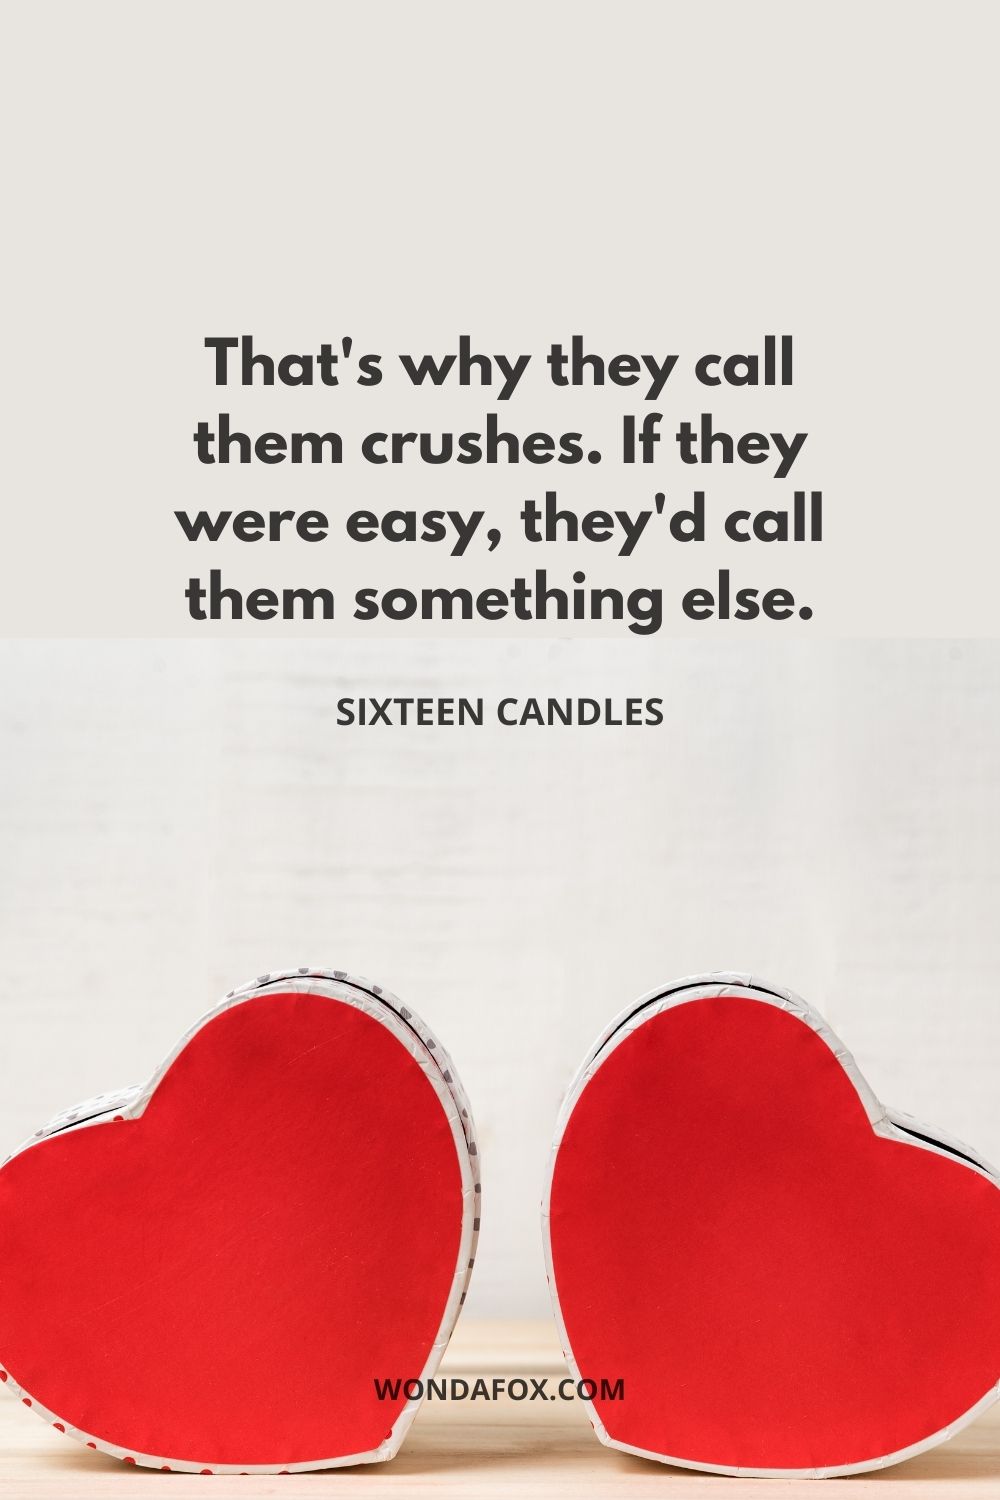 That's why they call them crushes. If they were easy, they'd call them something else.